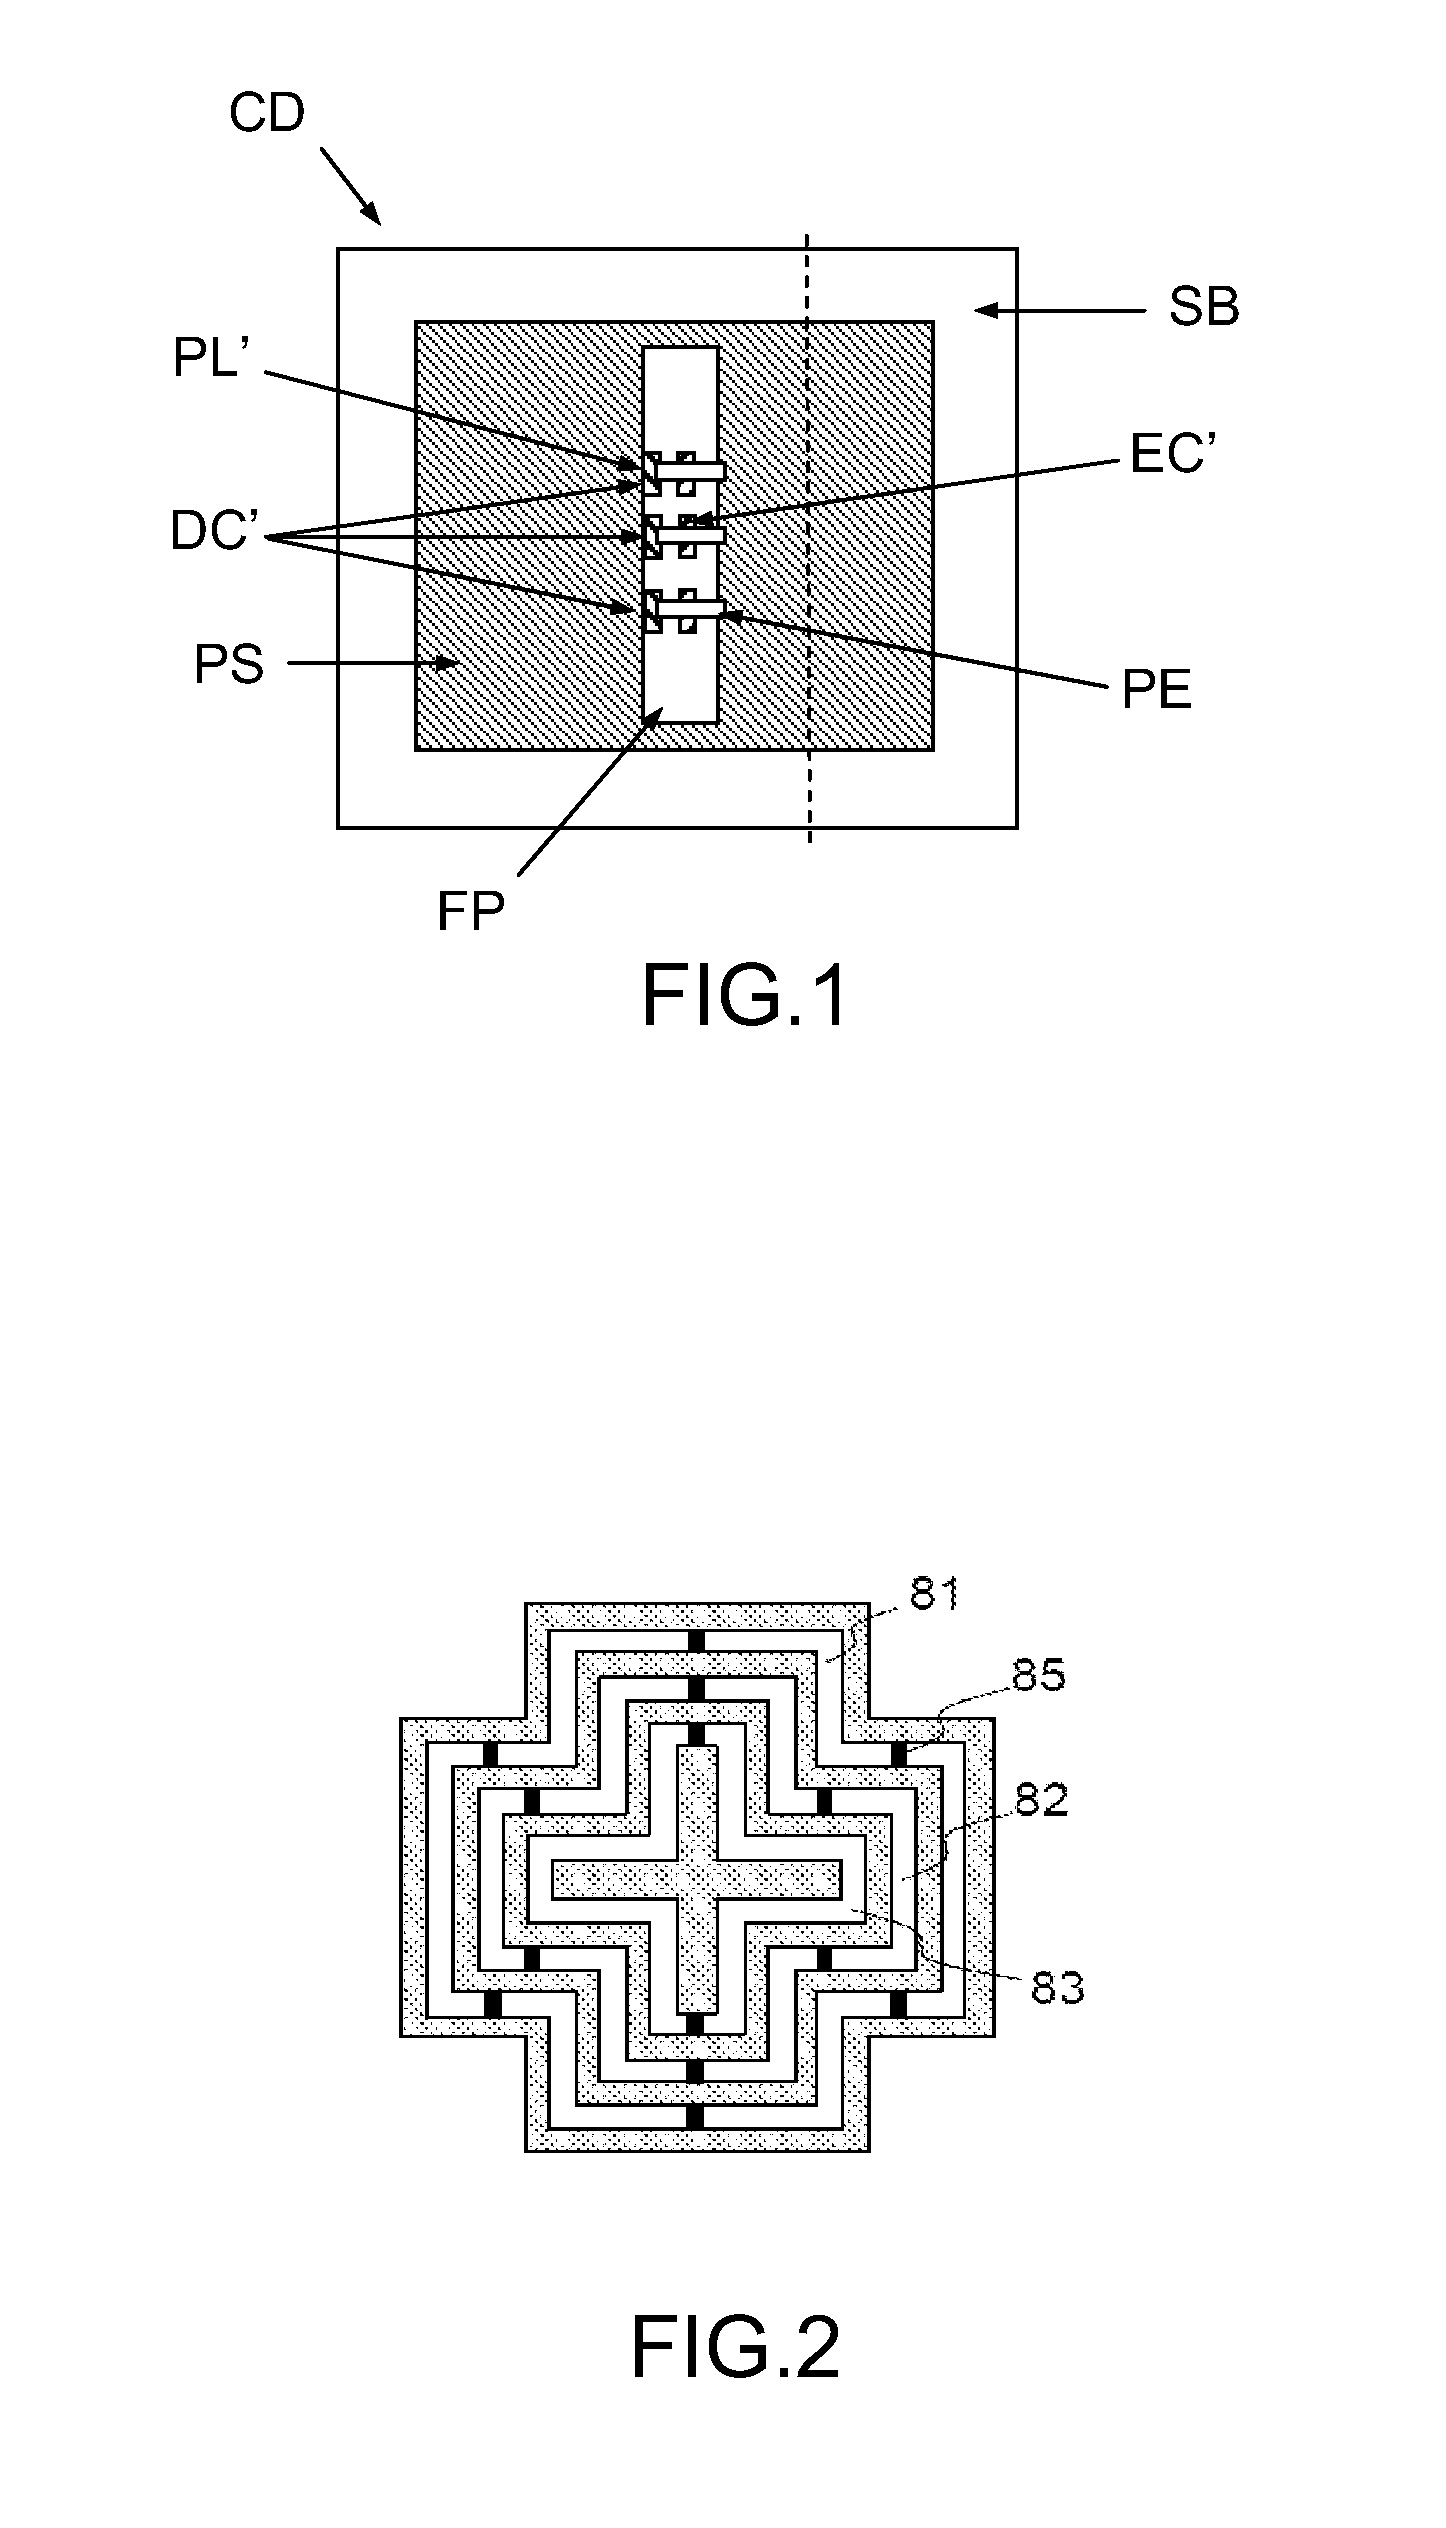 Reconfigurable Radiating Phase-Shifting Cell Based on Complementary Slot and Microstrip Resonances